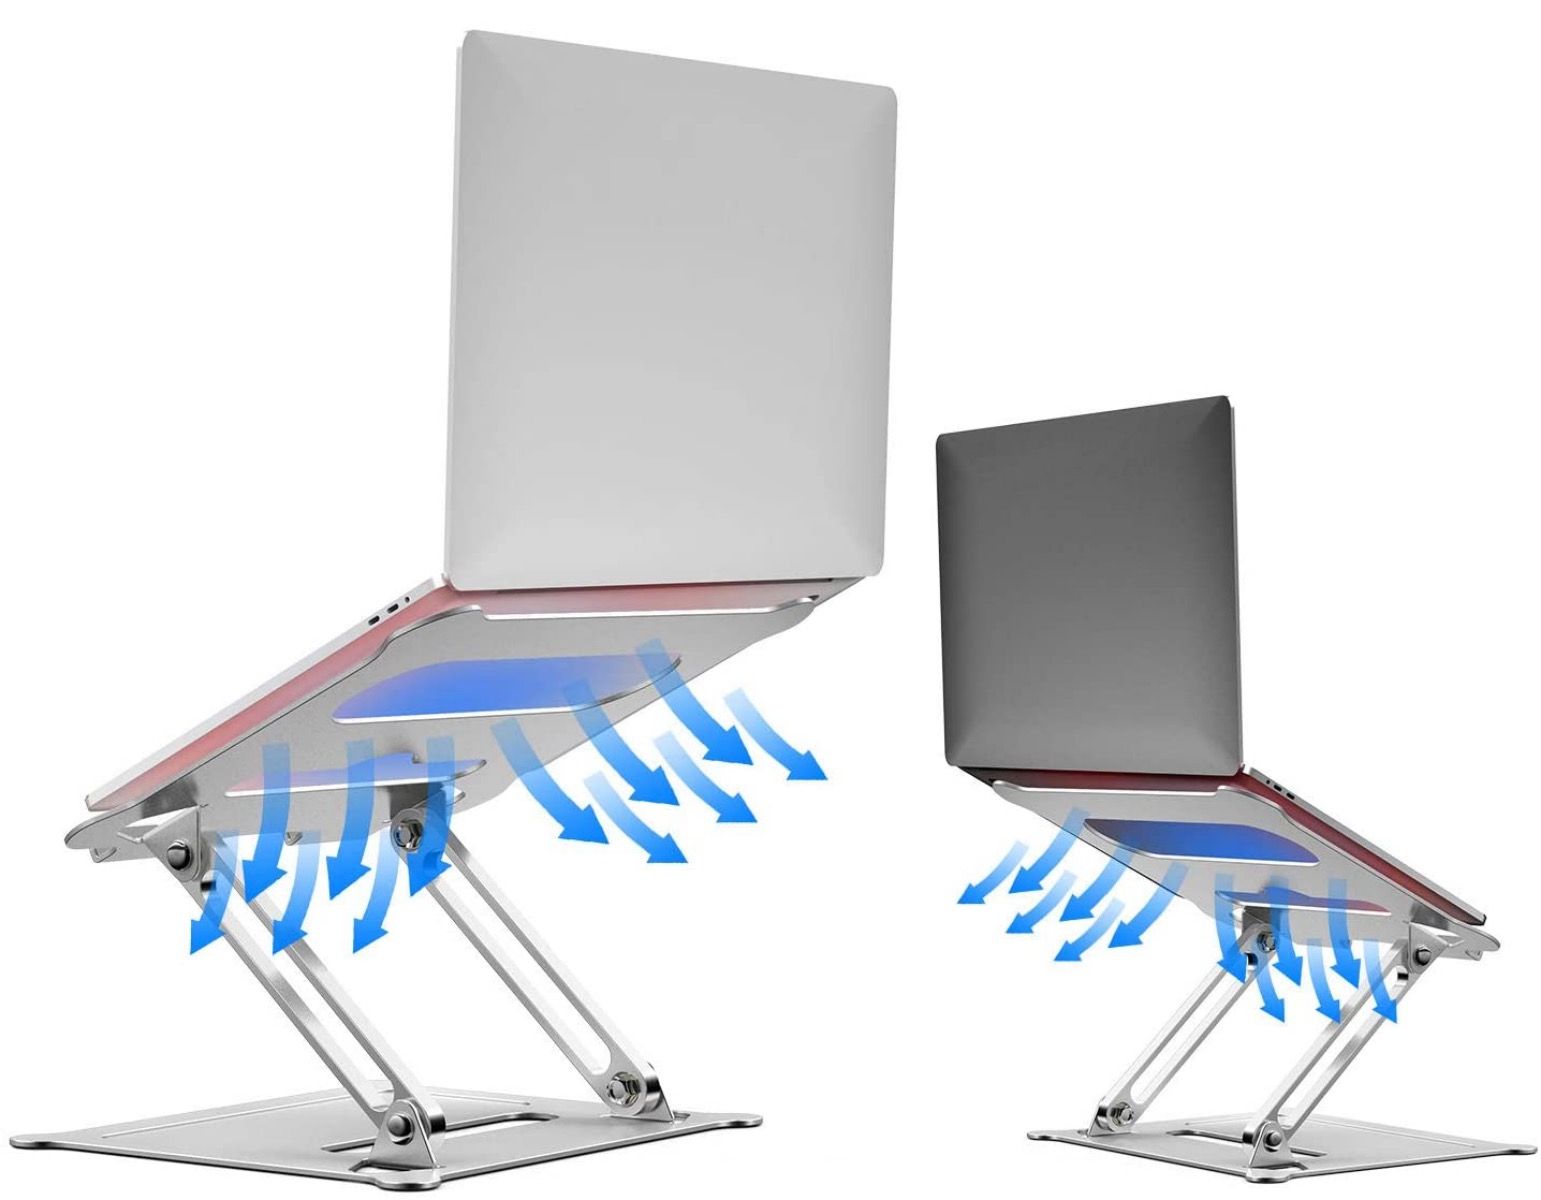 A Duchy adjustable laptop stand with arrows showing the airflow of the ventilation feature